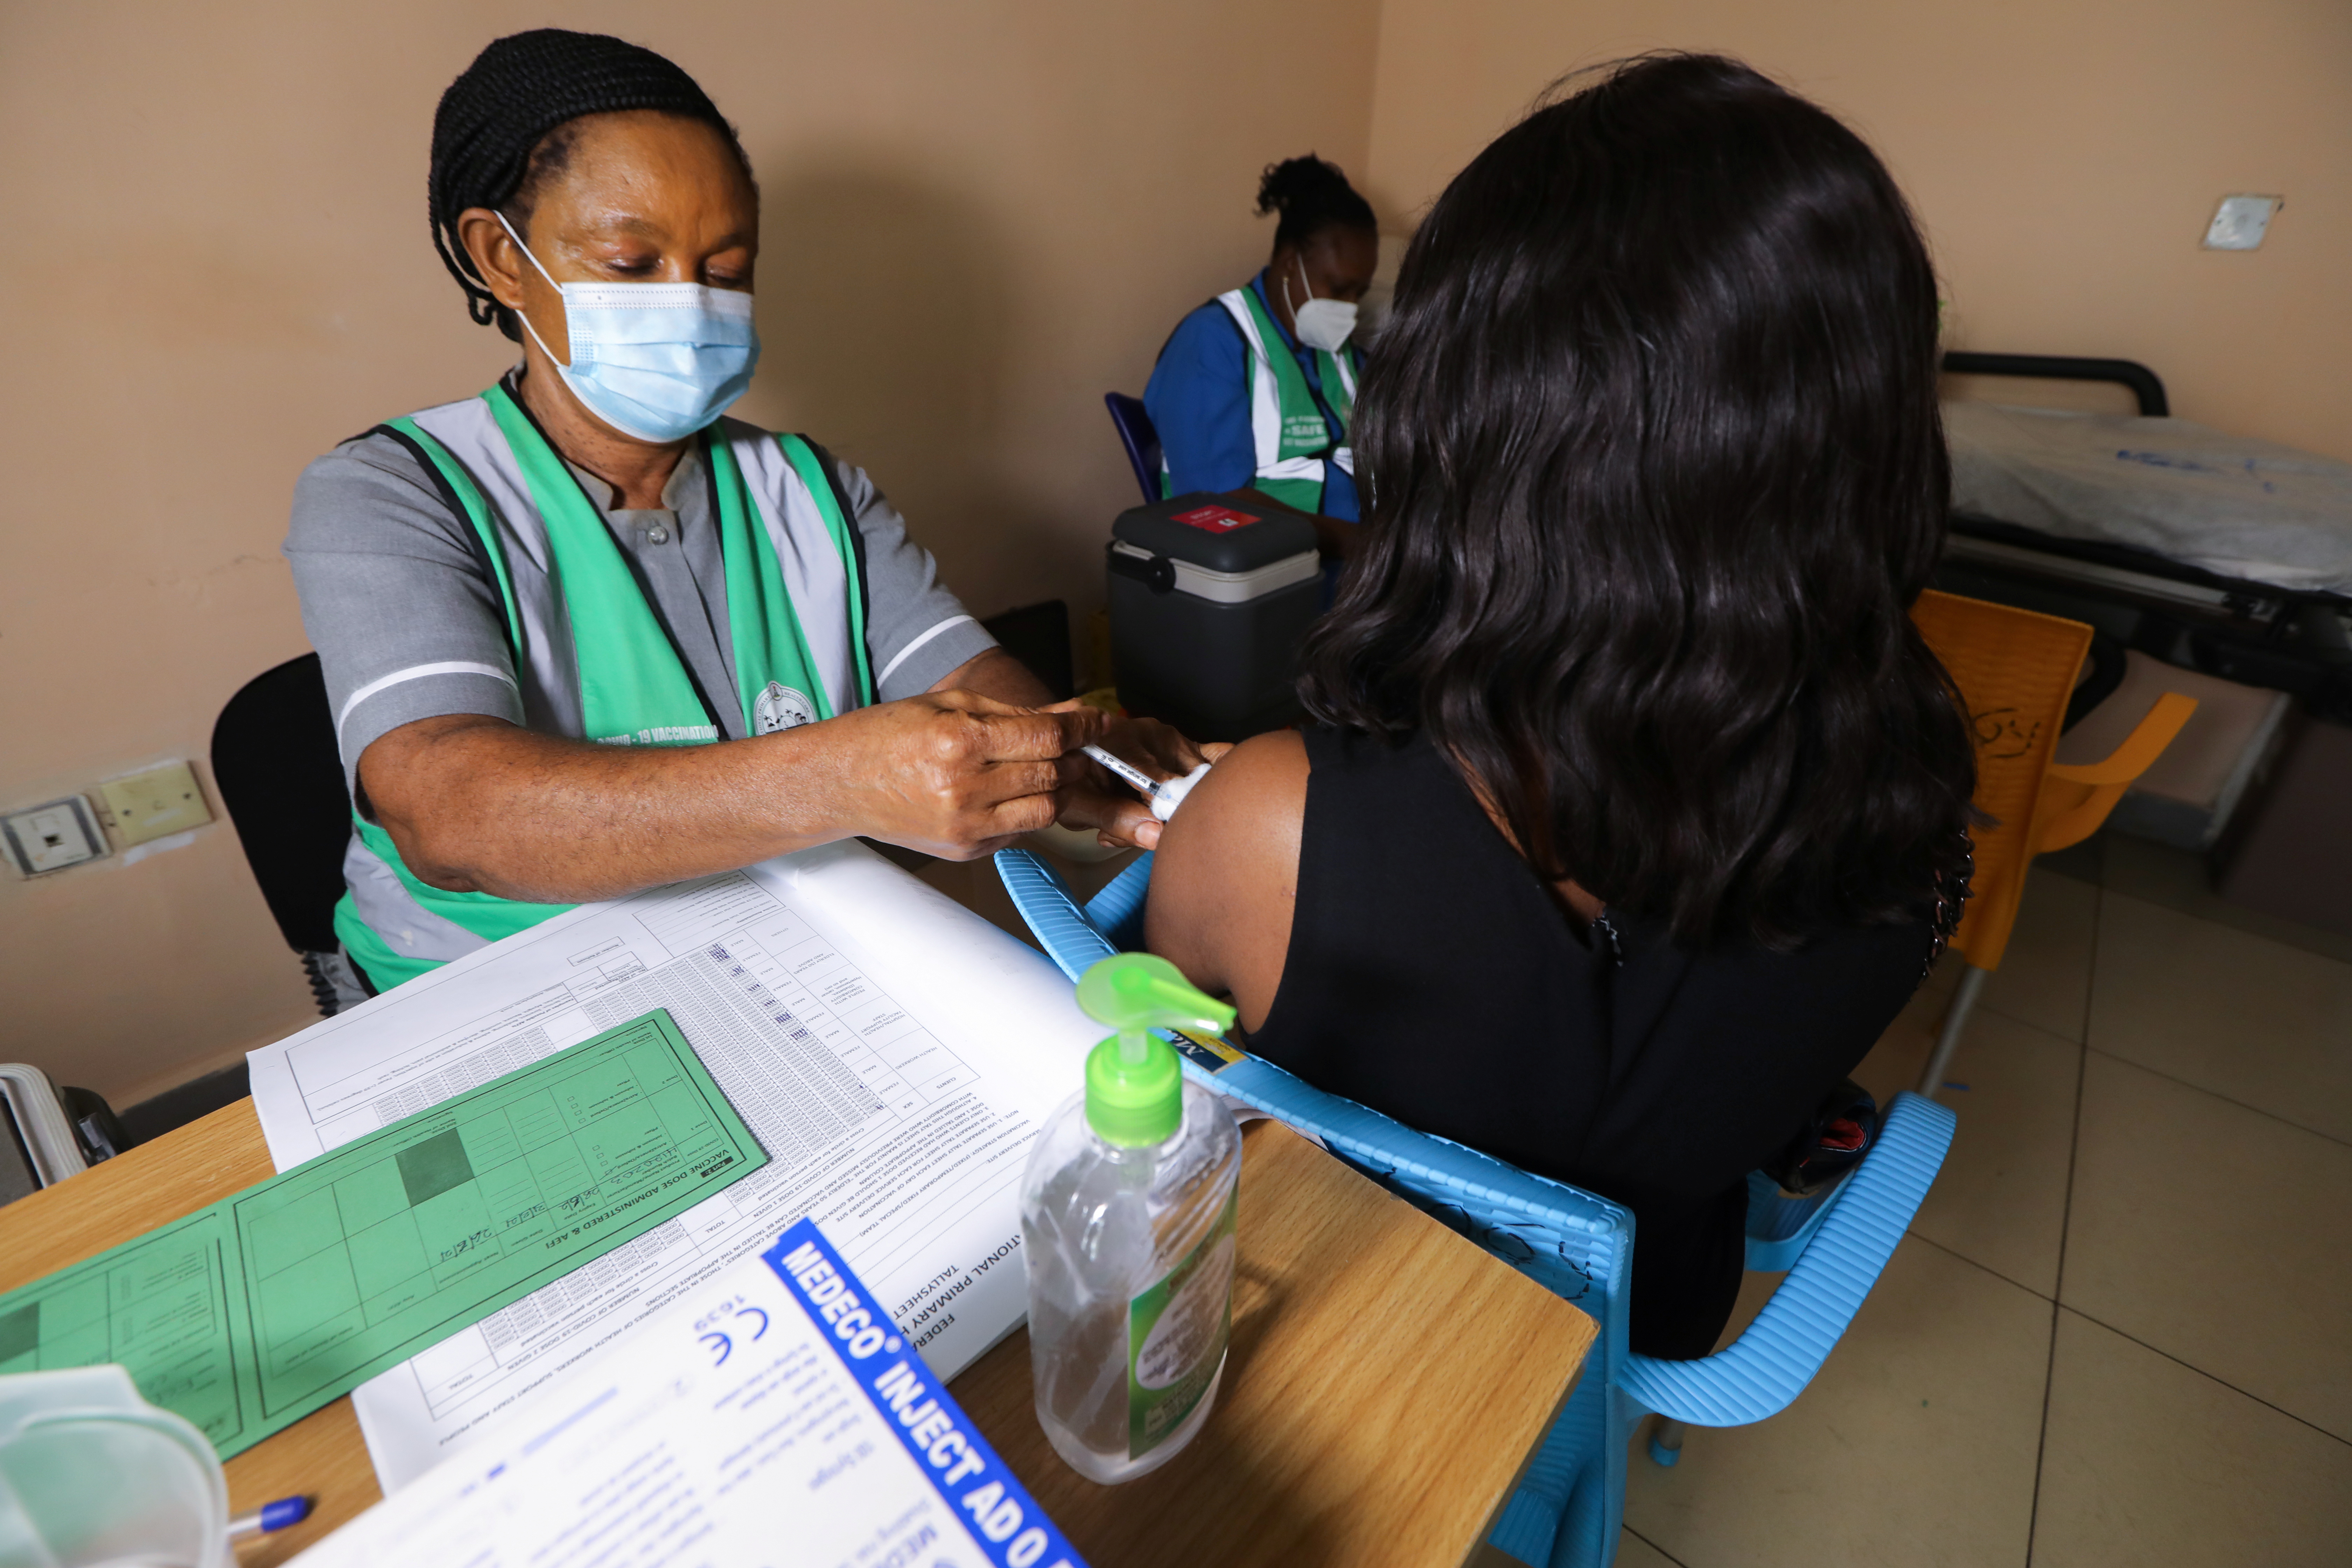 A medical worker injects the AstraZeneca's COVID-19 vaccine to a woman at the Nationa Hospital in Abuja